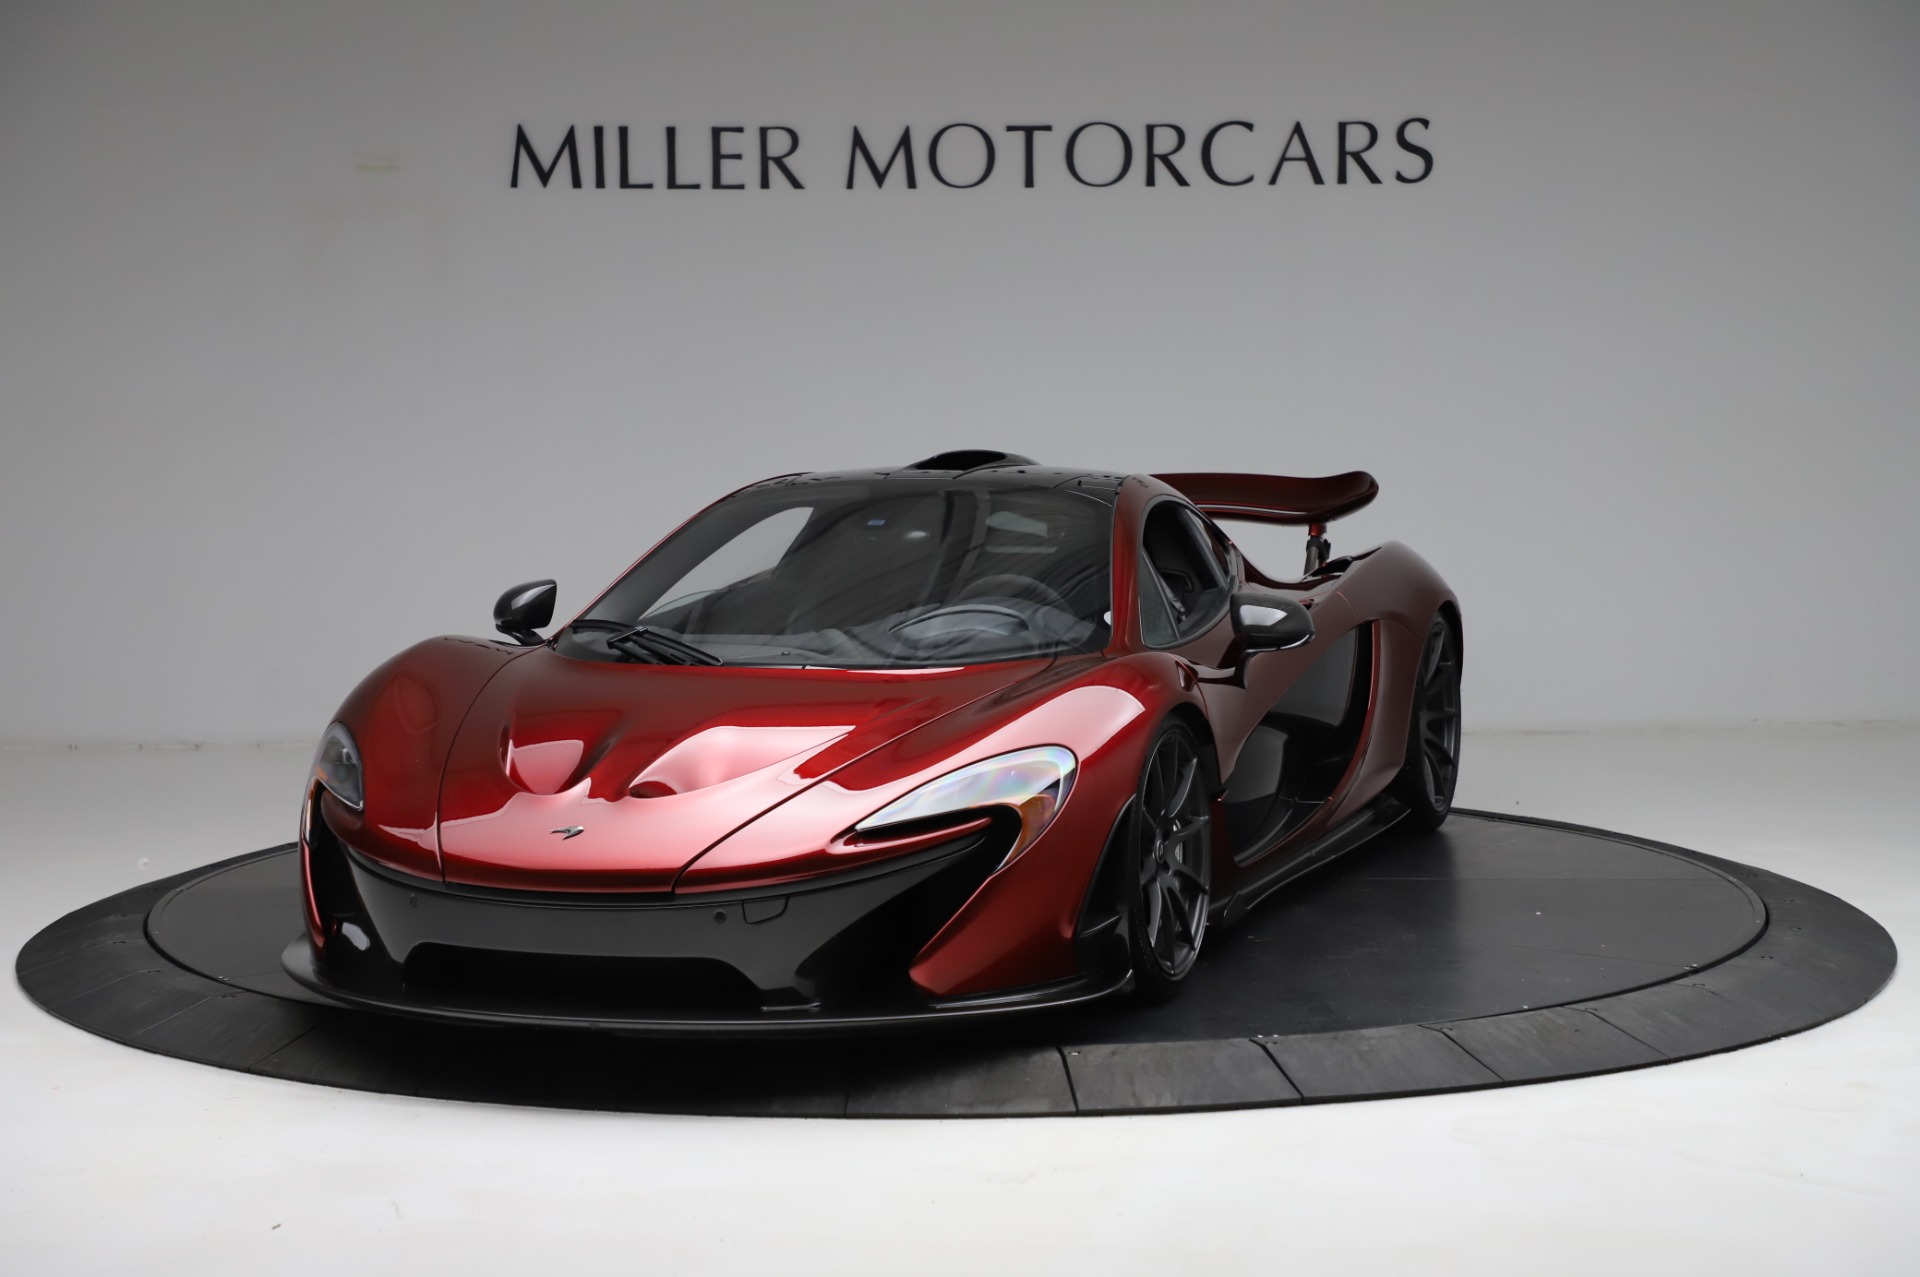 Used 2014 McLaren P1 for sale Sold at Bentley Greenwich in Greenwich CT 06830 1